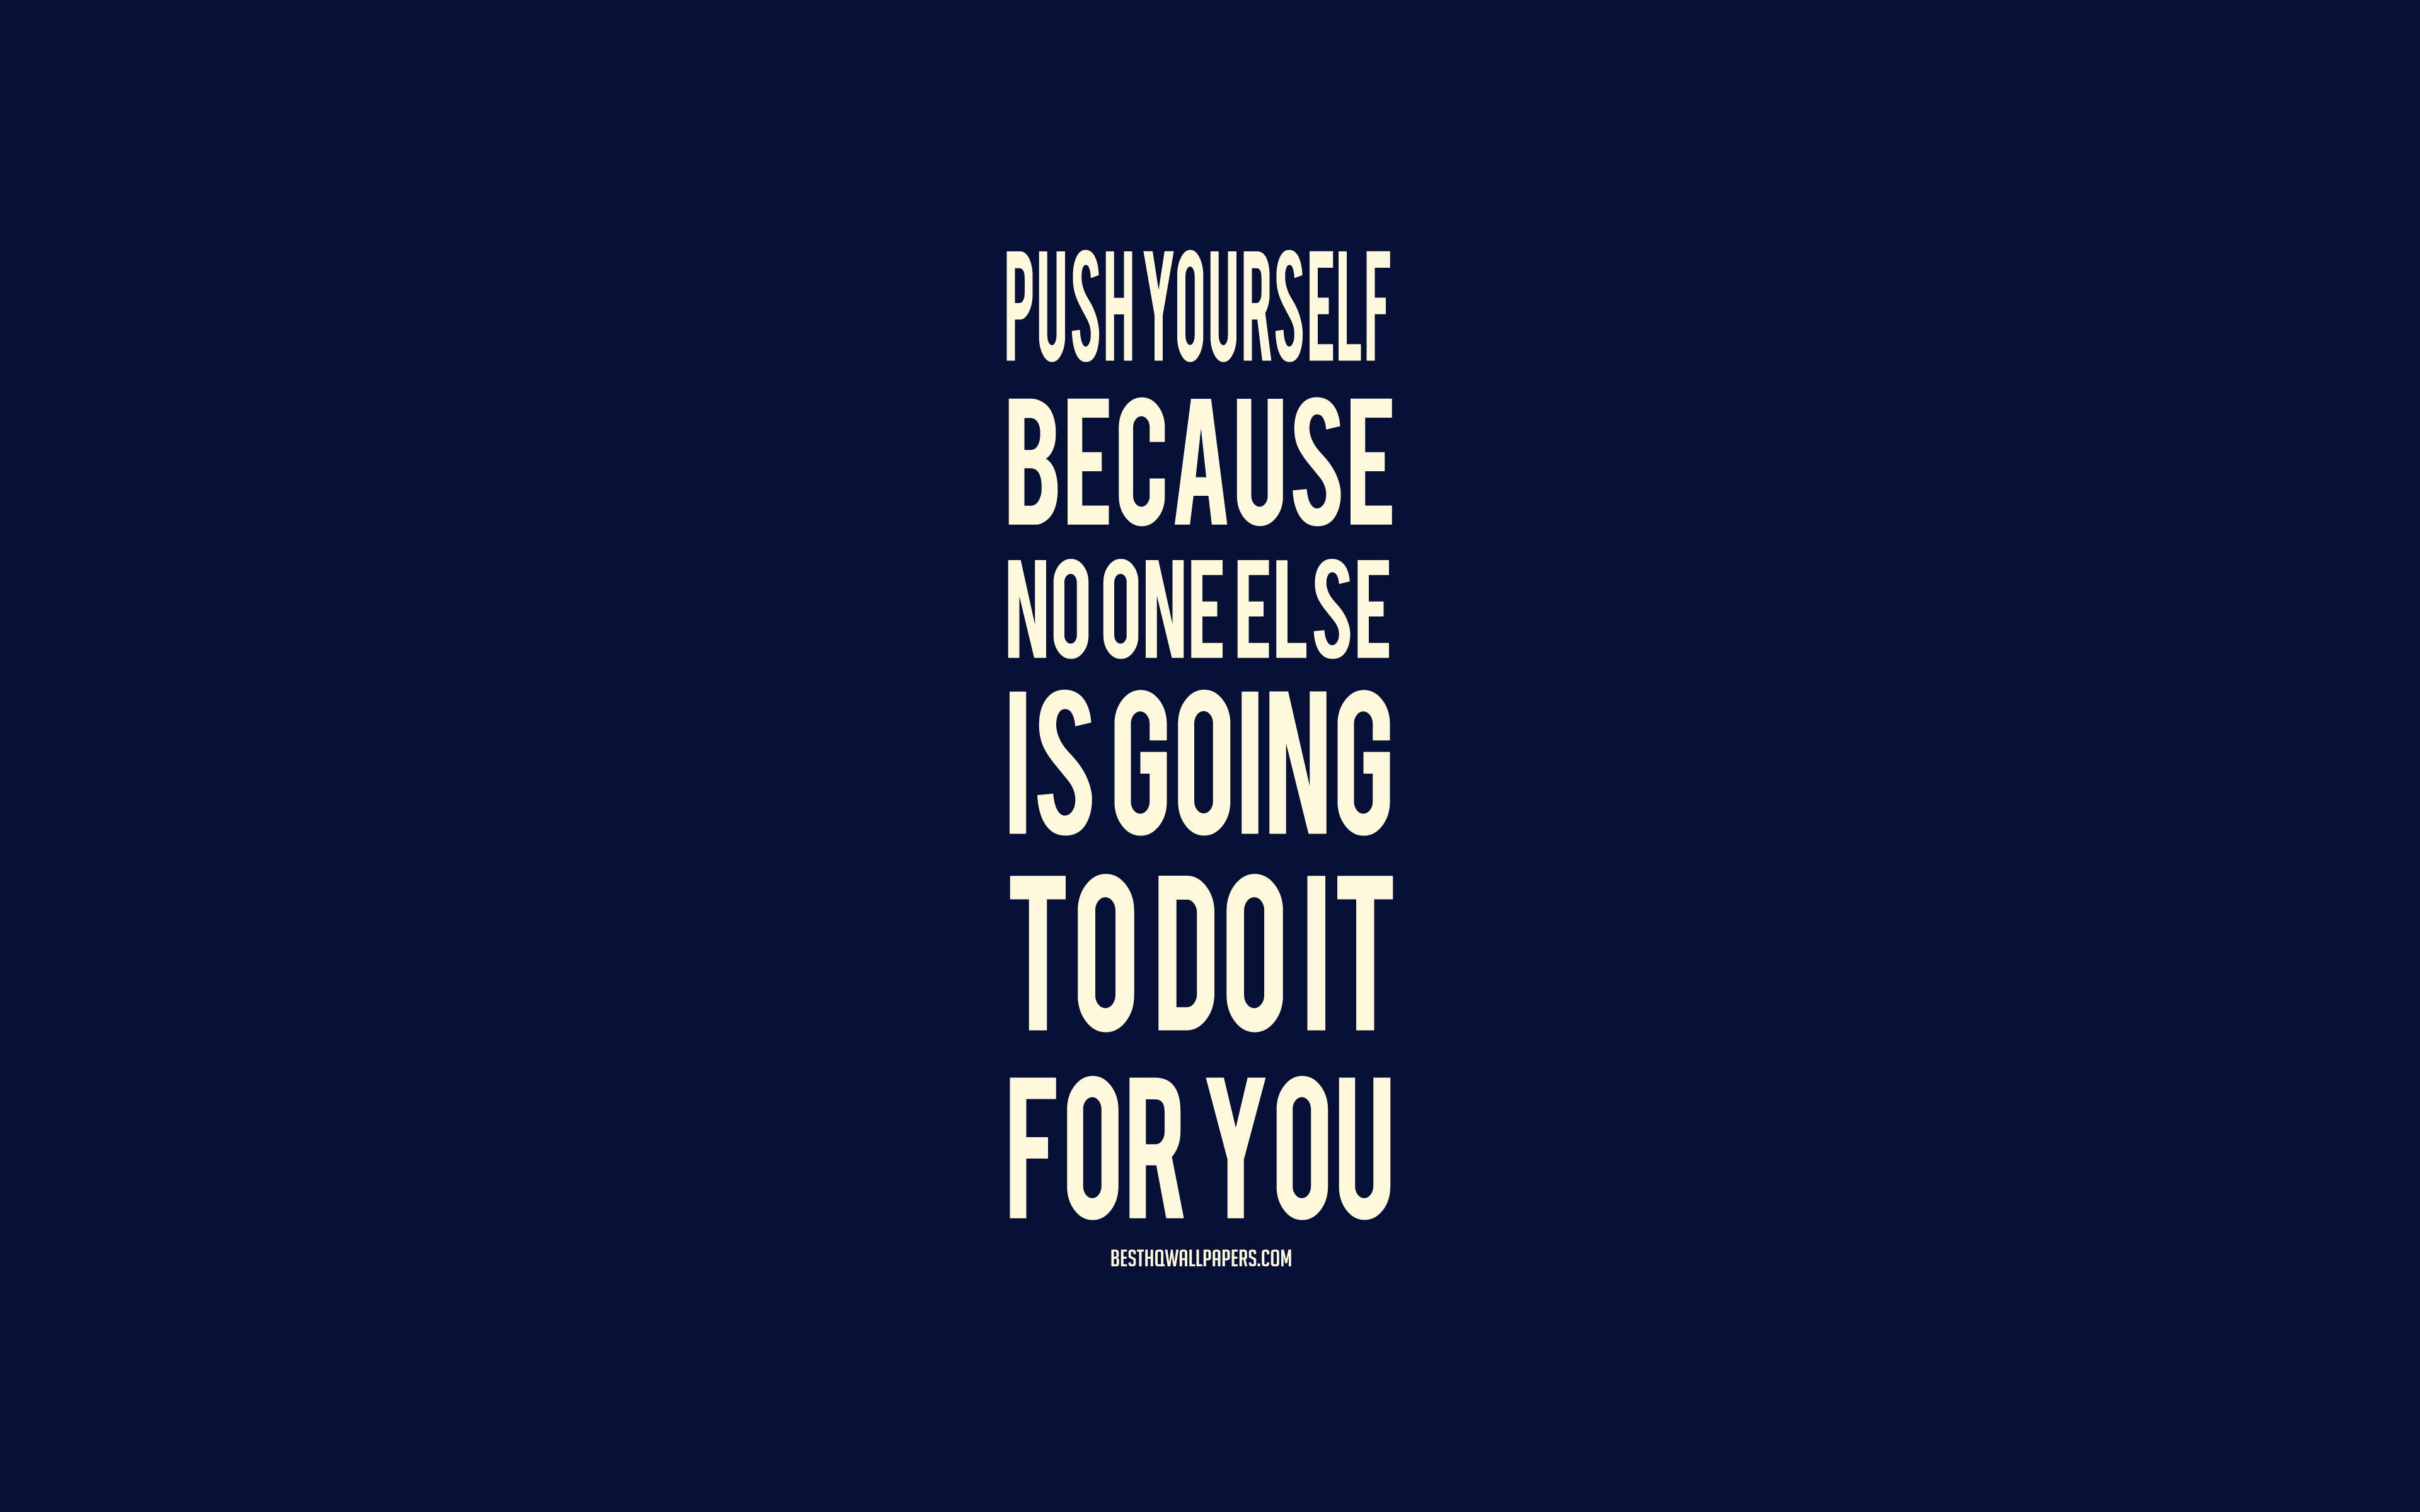 Download wallpaper Push yourself because no one else is going to do it for you, motivation quotes, inspiration, popular quotes, minimalism art, blue background for desktop with resolution 3840x2400. High Quality HD